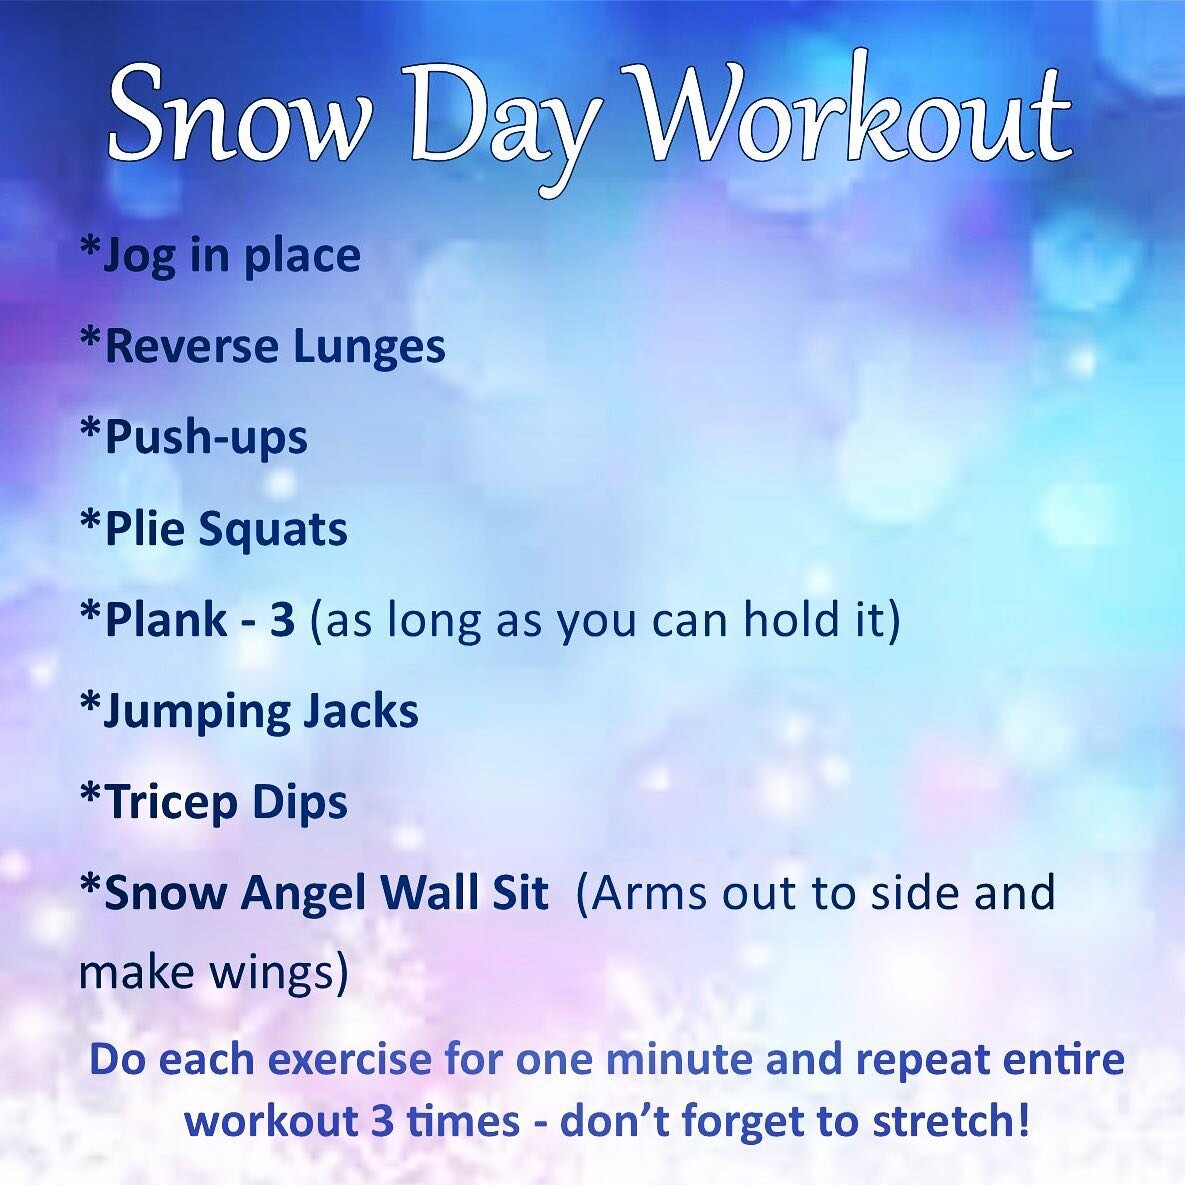 We are closing EARLY (12pm) TODAY but that doesn&rsquo;t mean you can&rsquo;t get a workout in! Try this snowed in circuit 3x to help stay warm, safe and active! #healthtrax #glastonbury #snowedin #fitness #workout #mondaymotivation #health #wellness